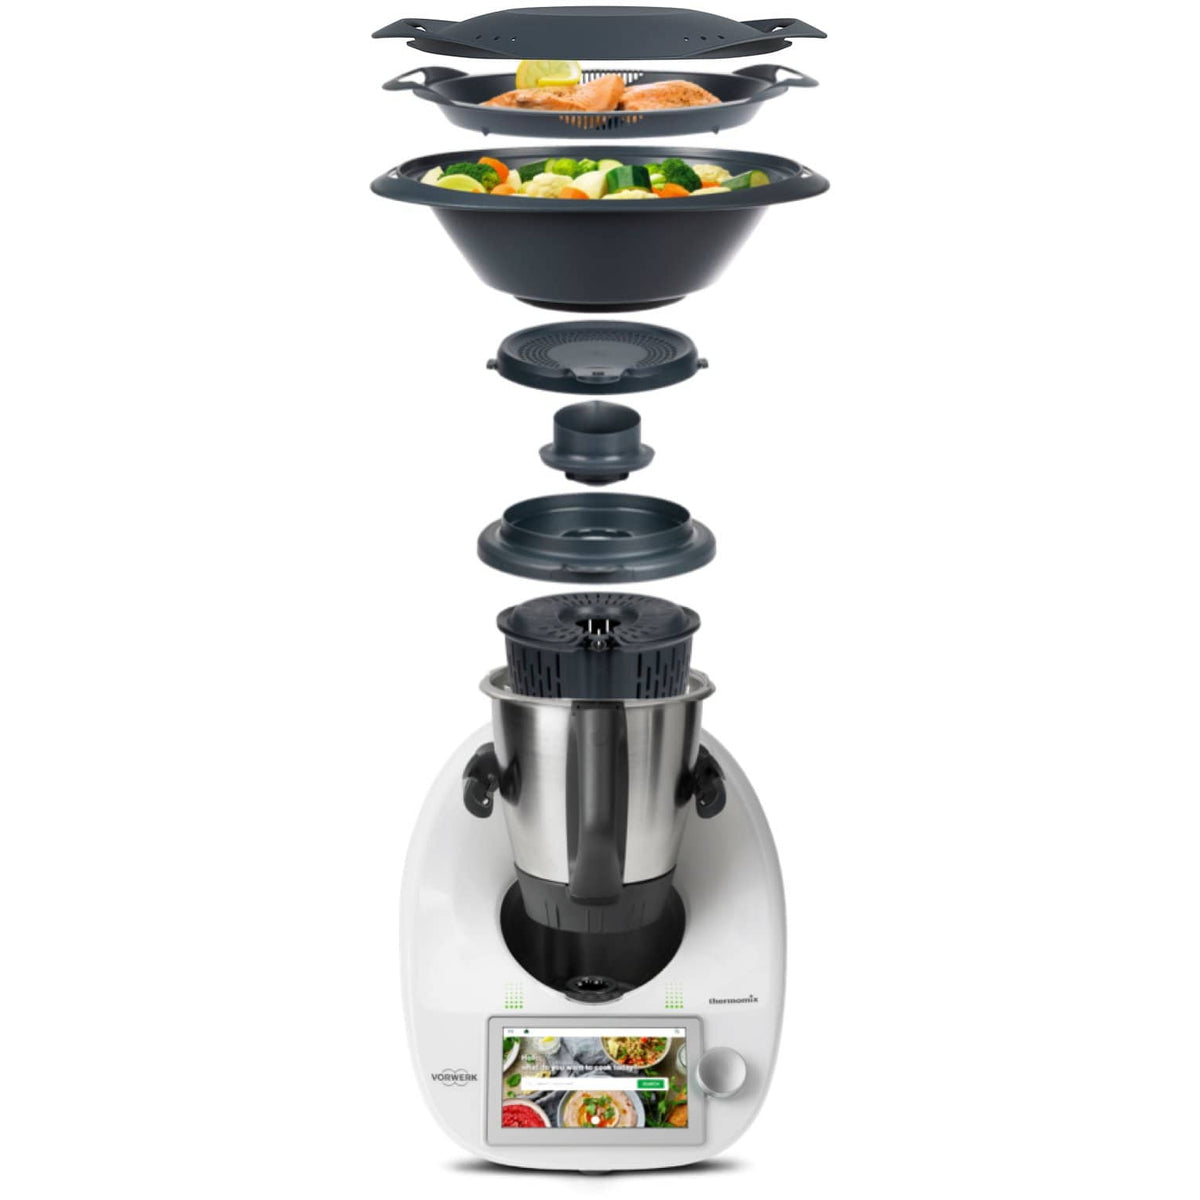 Thermomix® TM6 - The All-In-One Cooking Appliance